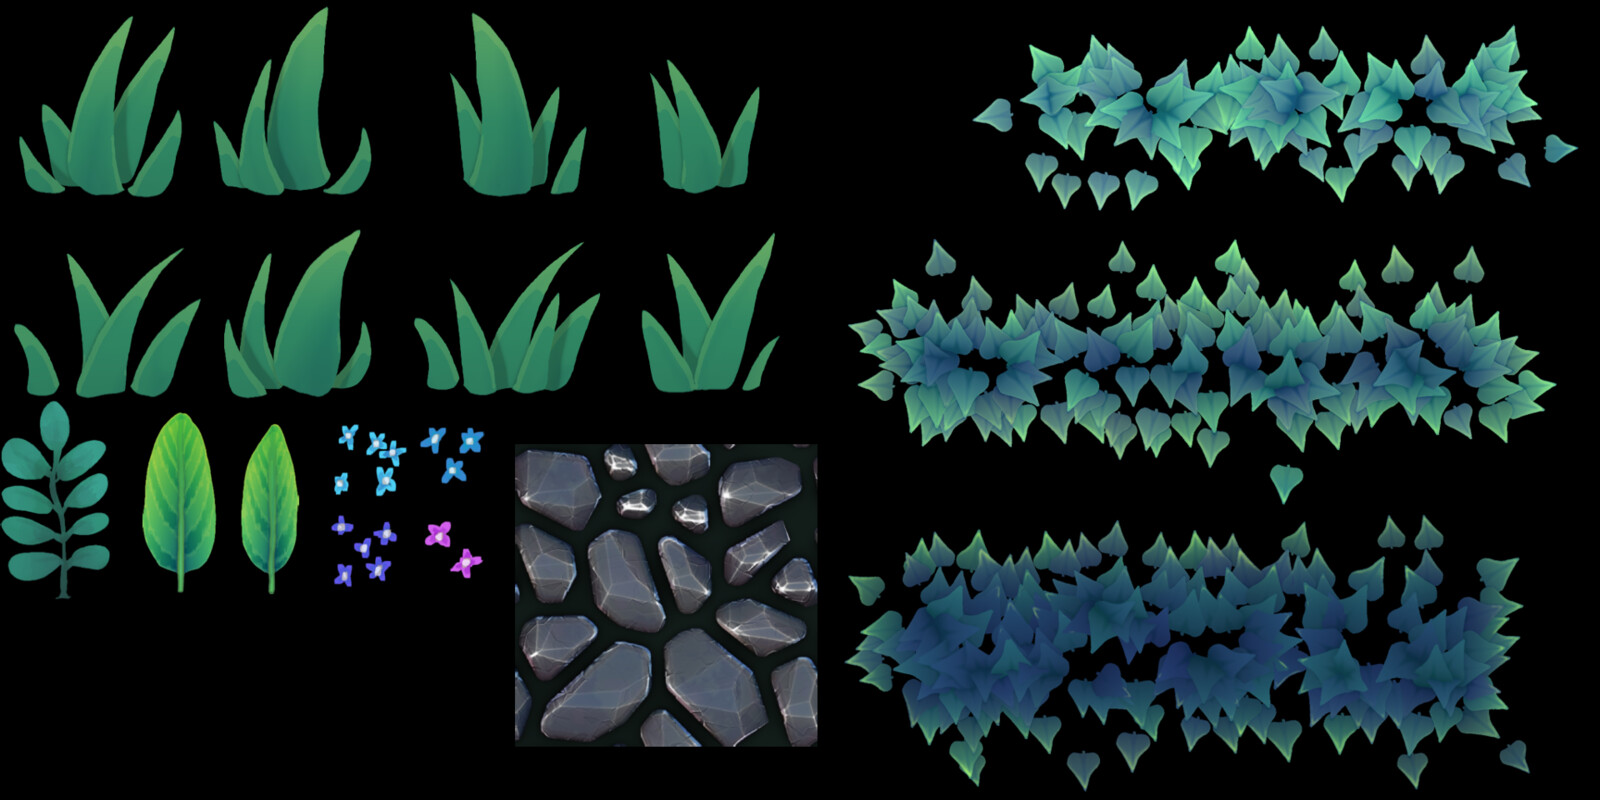 Foliage Atlases generated from substance designer.